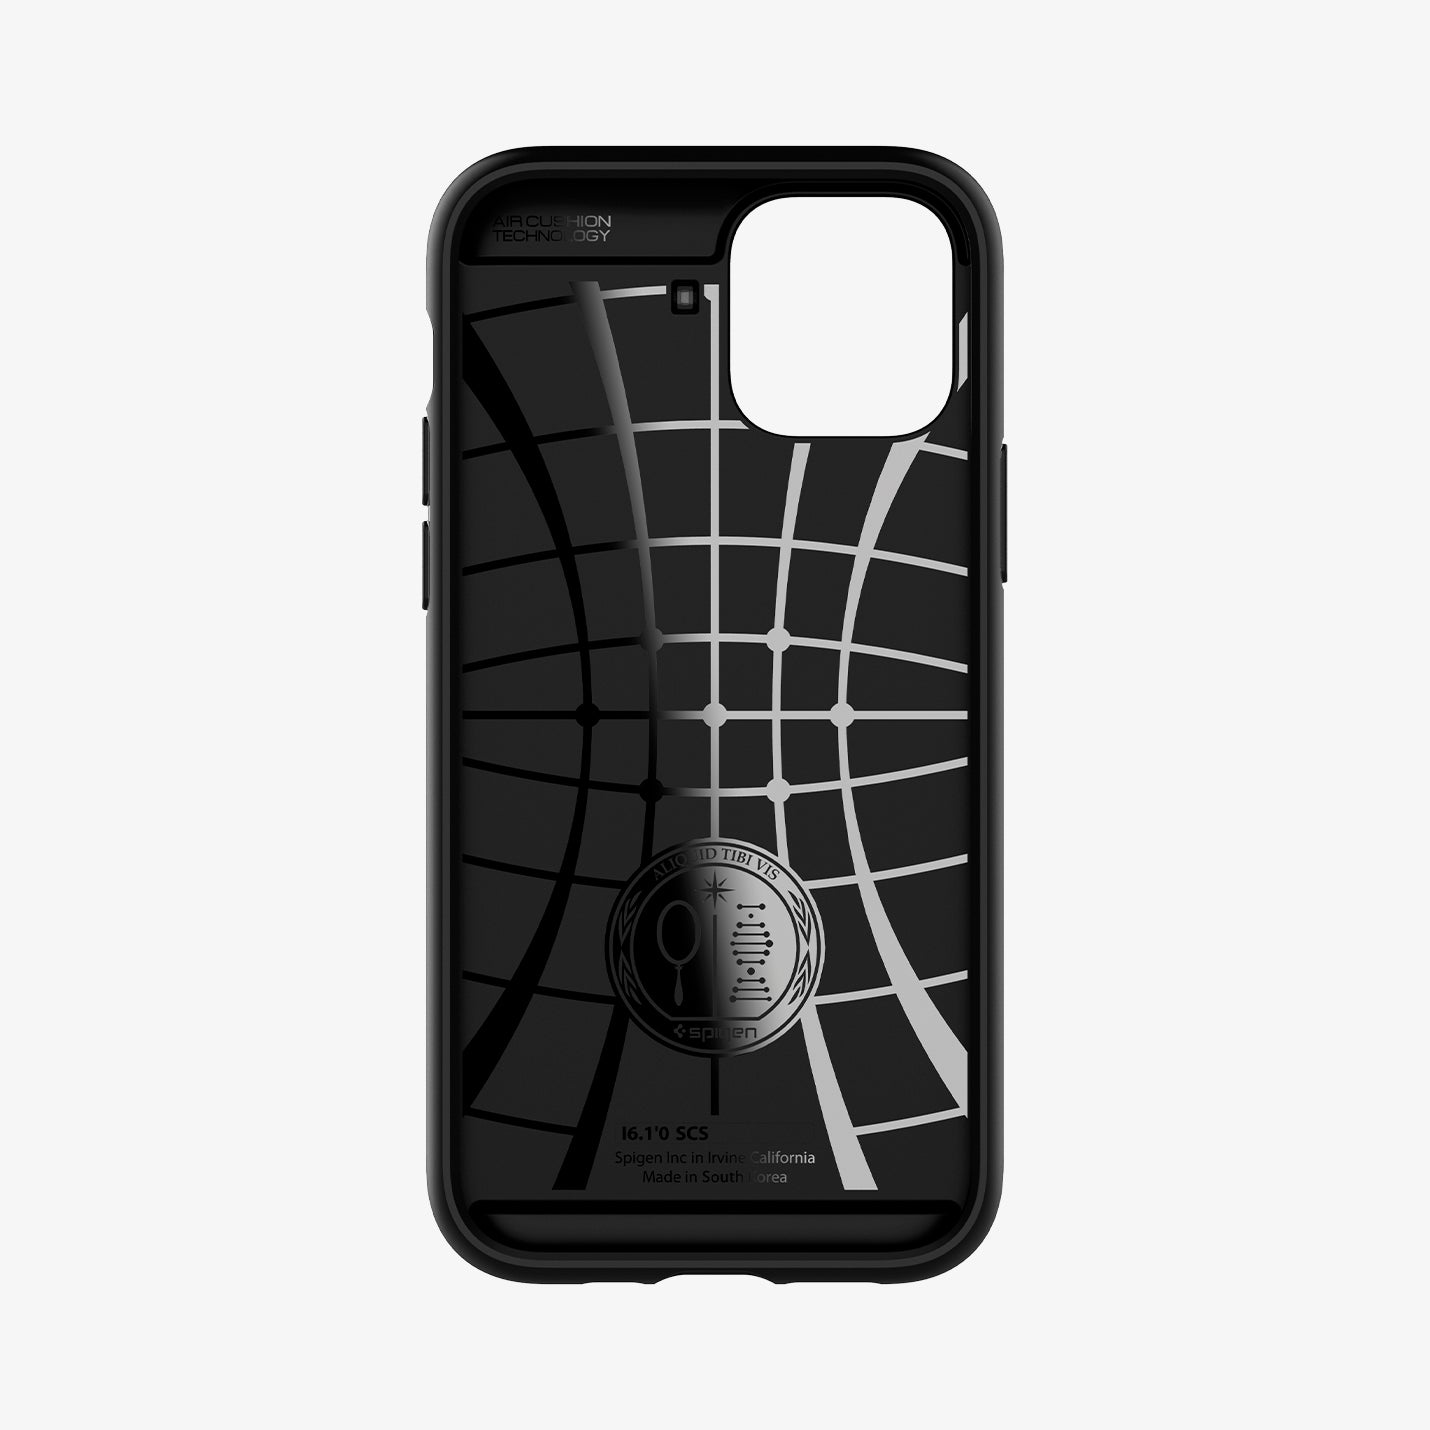 ACS01707 - iPhone 12 / iPhone 12 Pro Case Slim Armor CS in black showing the inside of case